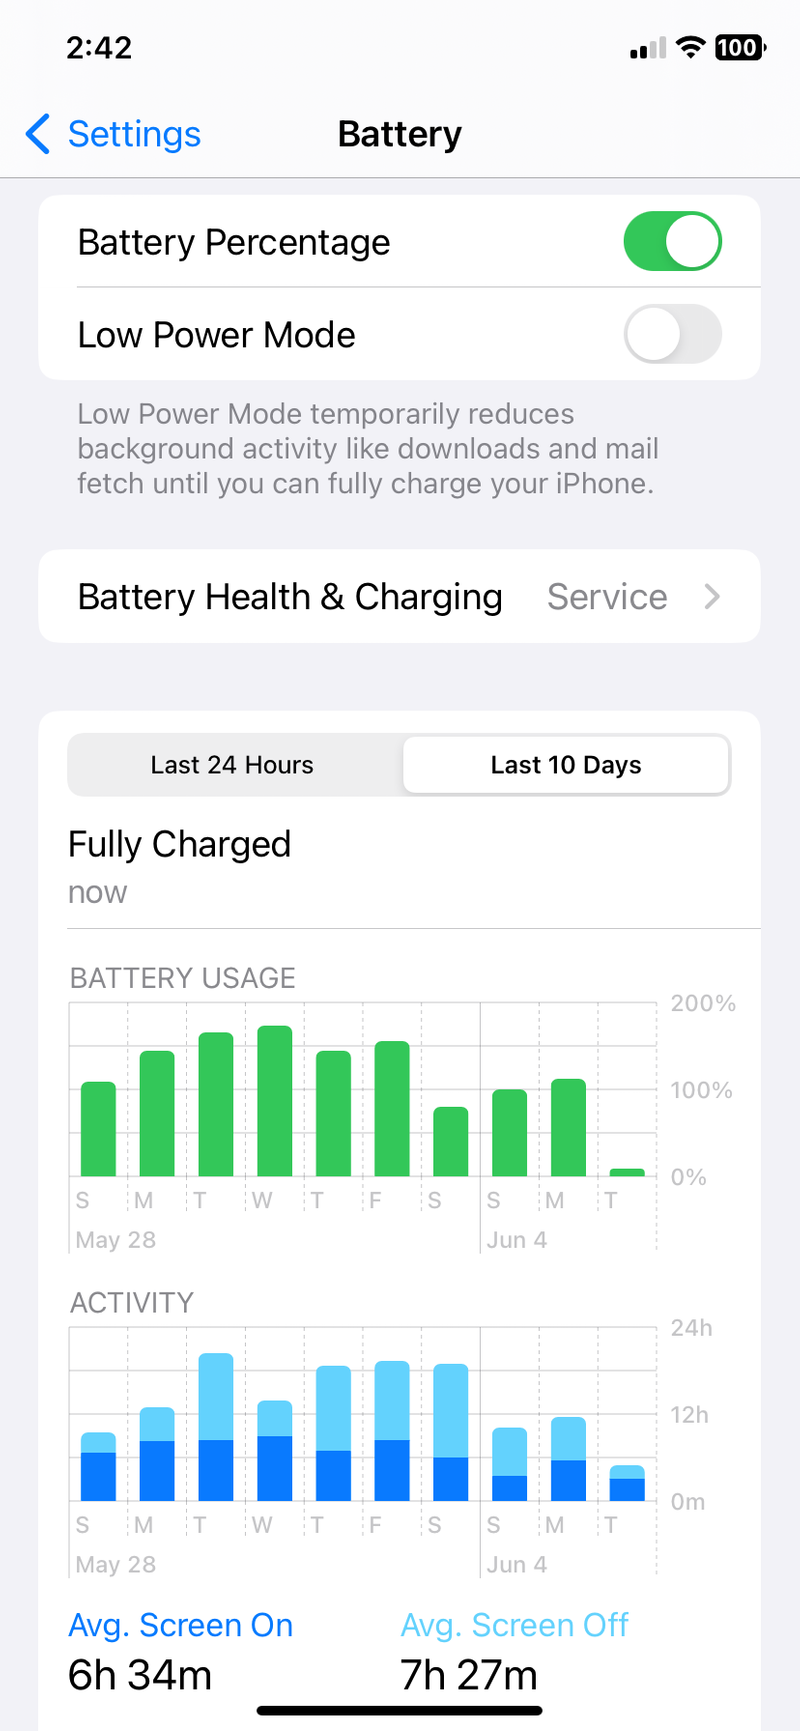 iPhone battery usage information under Settings.